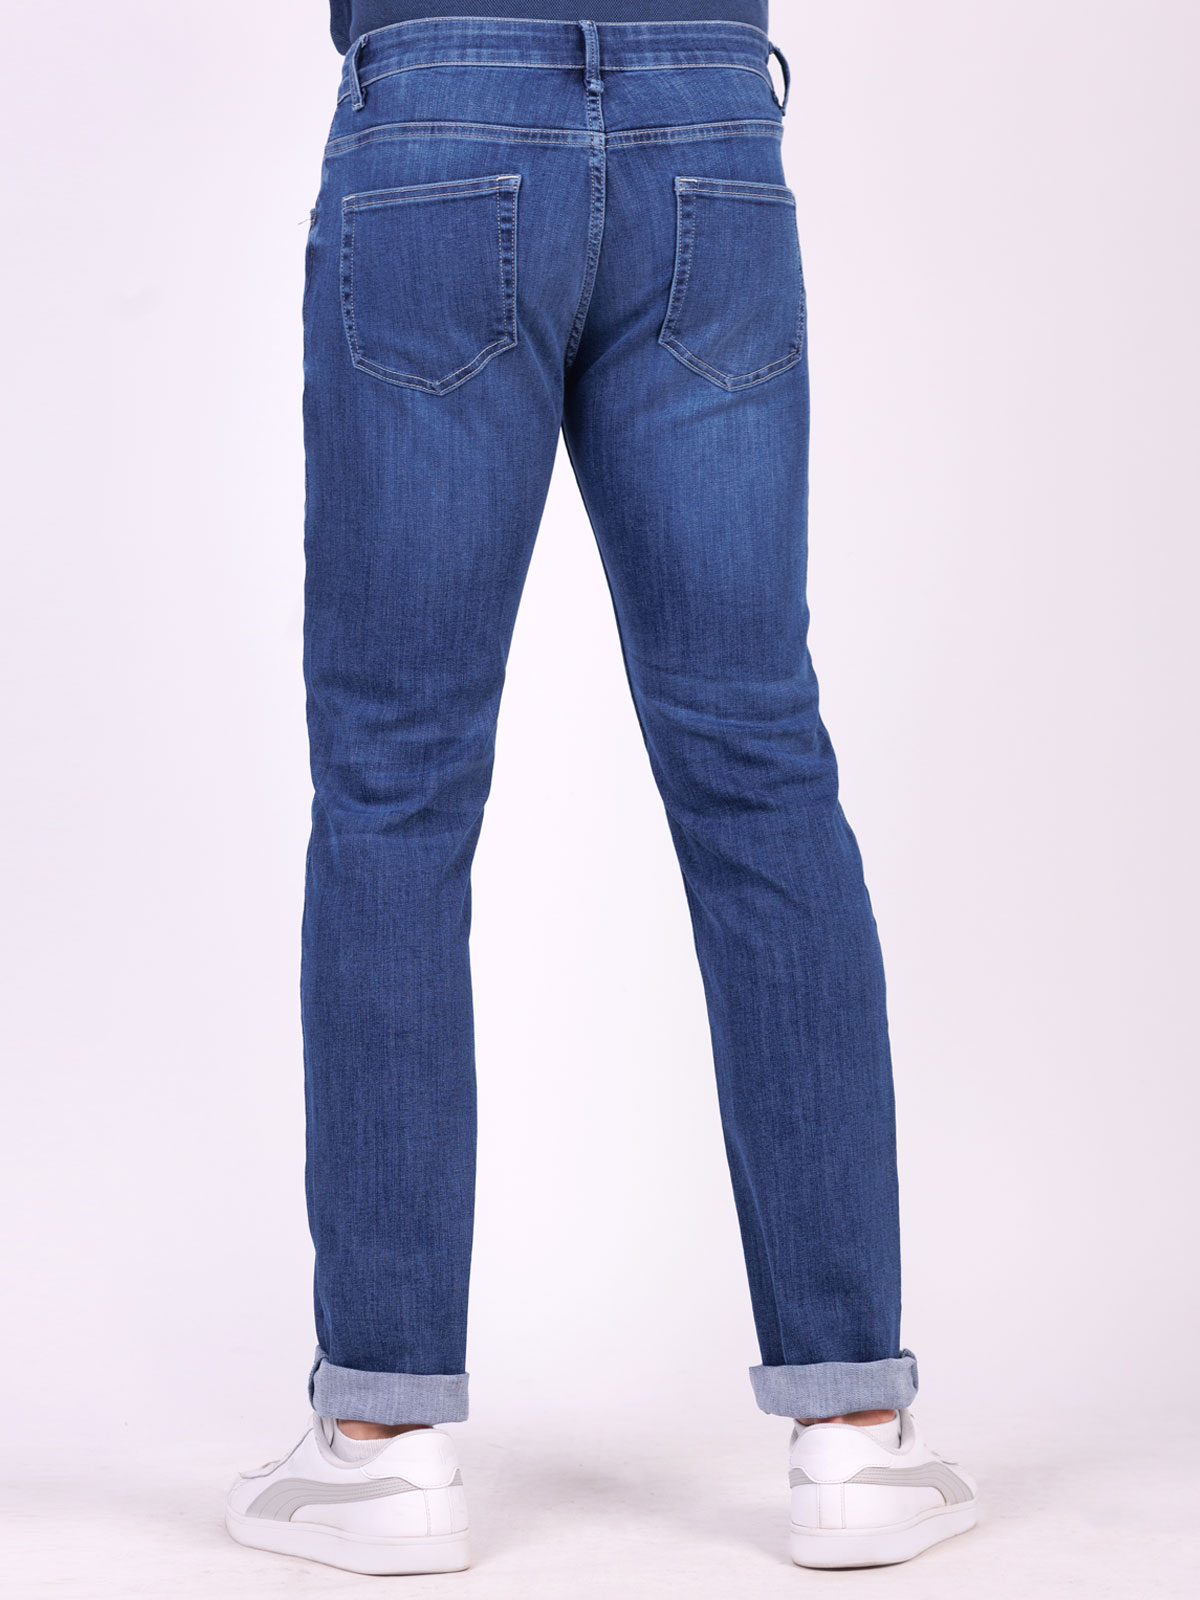 Mens blue jeans with trit effect - 62168 € 66.93 img2